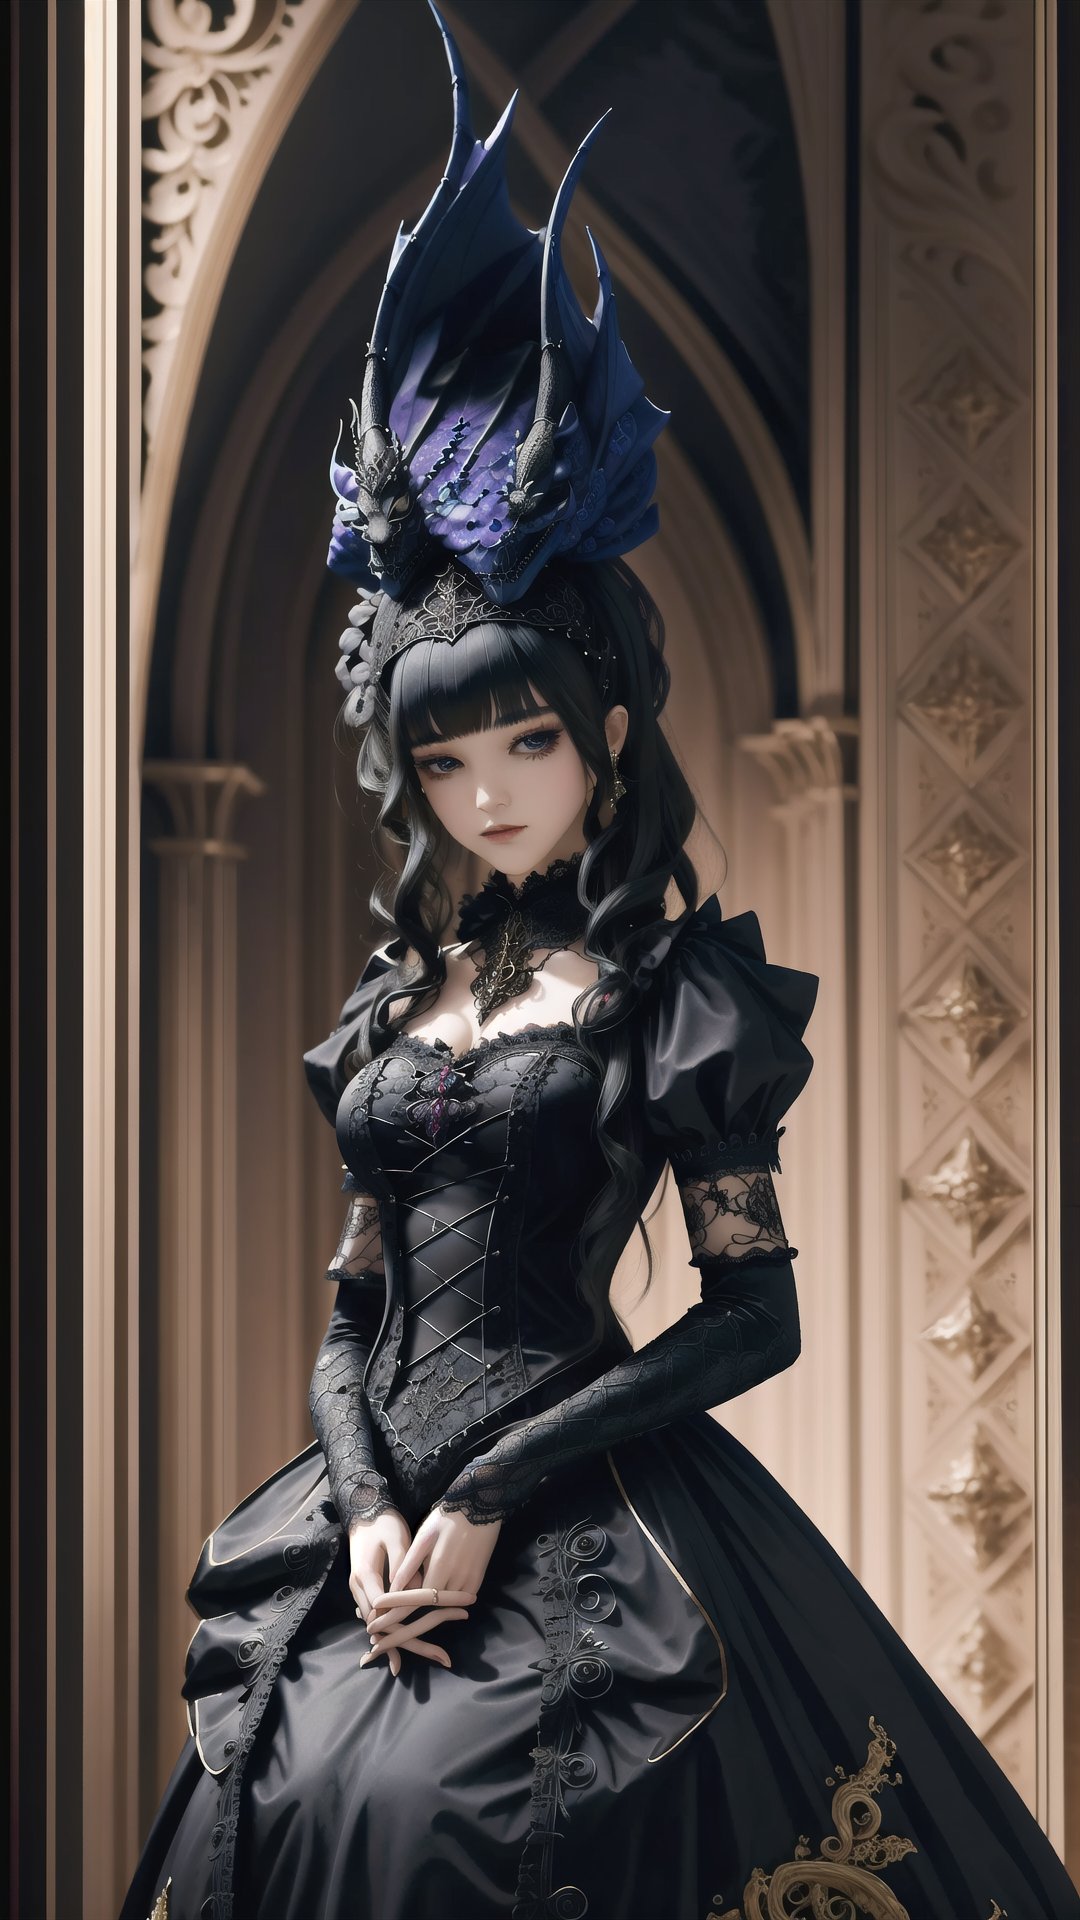 A dragon, adorned in a fusion of Renaissance European noble fashion and modern Gothic Lolita attire, wearing intricate ruffled collars, embroidered velvet garments, and lace accessories, The reptilian creature embodies both aristocratic elegance and contemporary gothic charm, creating a unique and surreal aesthetic